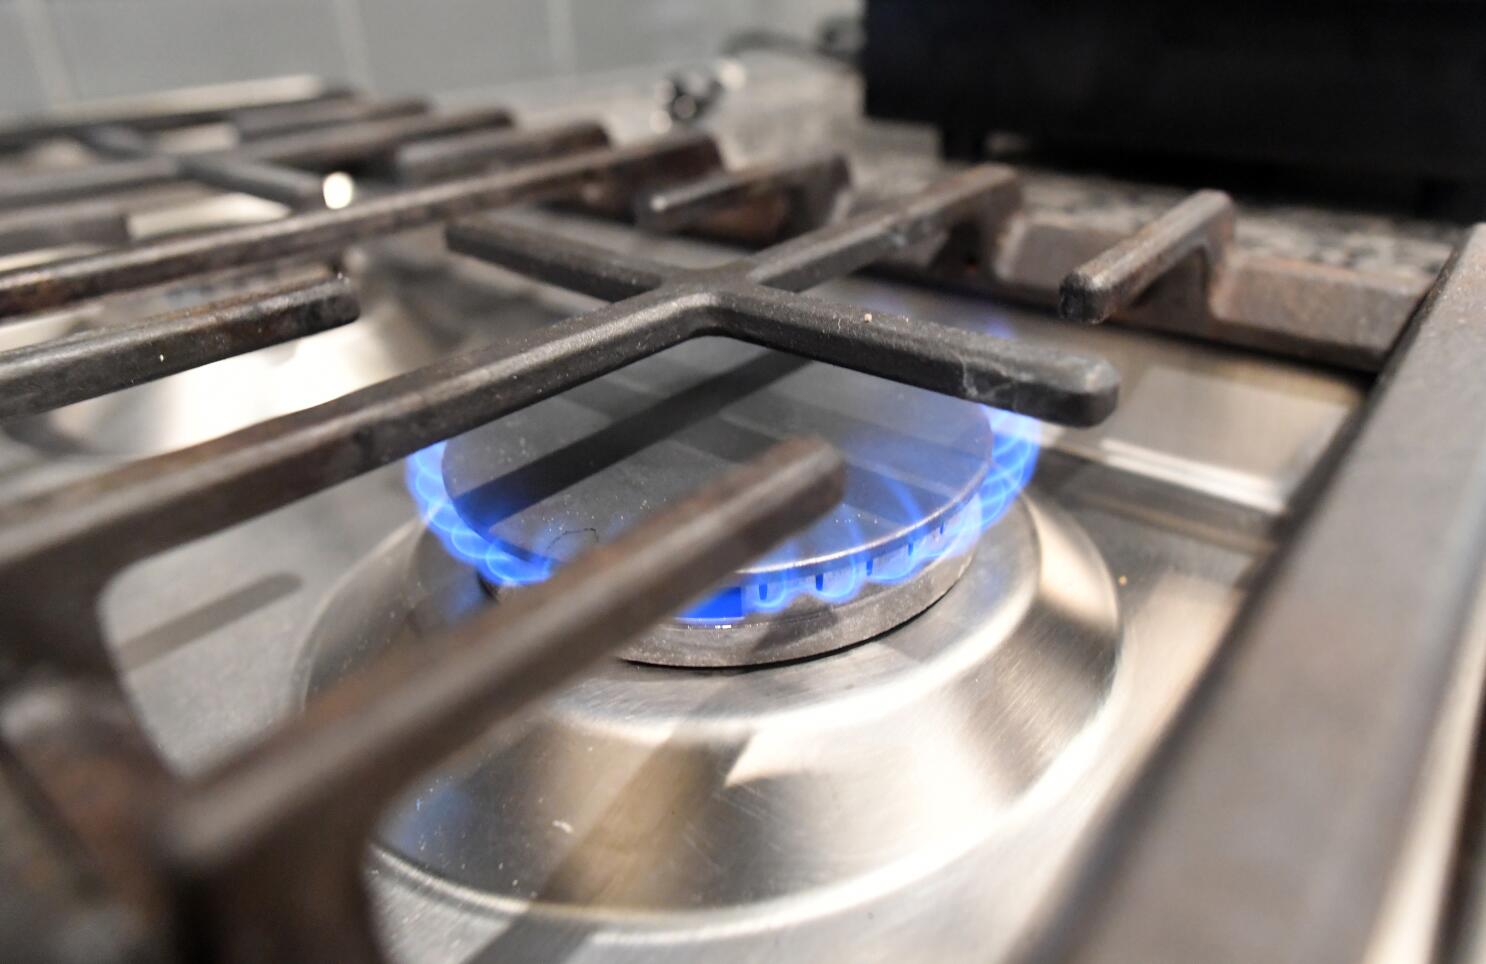 Why Are My Range Burner Flames Turning Orange? - Appliance Repair New Mexico